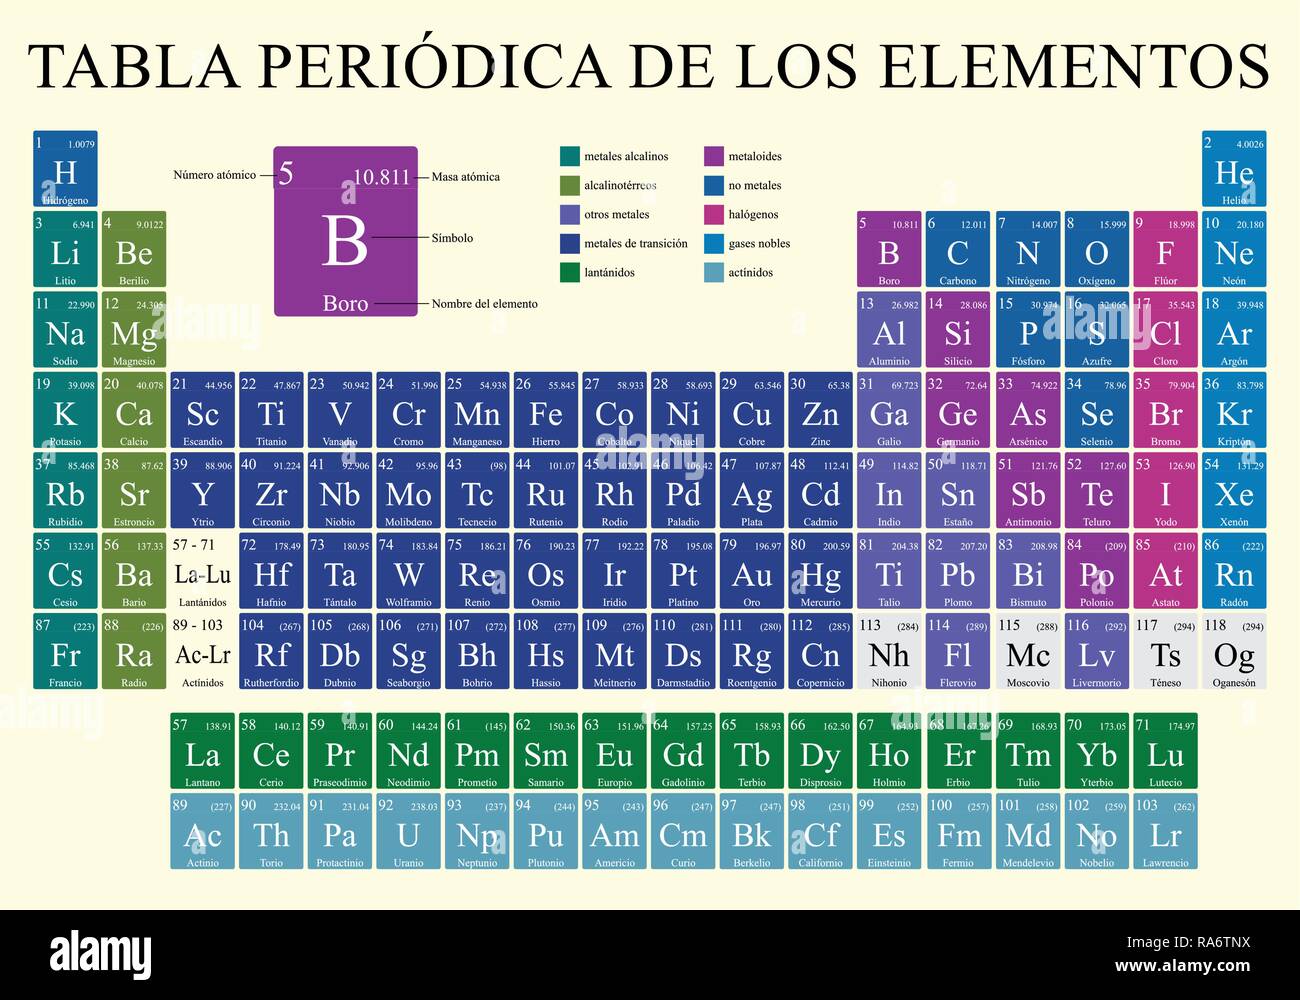 TABLA PERIODICA DE LOS ELEMENTOS -Periodic Table of Elements in Spanish language- in full color with the 4 new elements included on November 28, 2016 Stock Vector